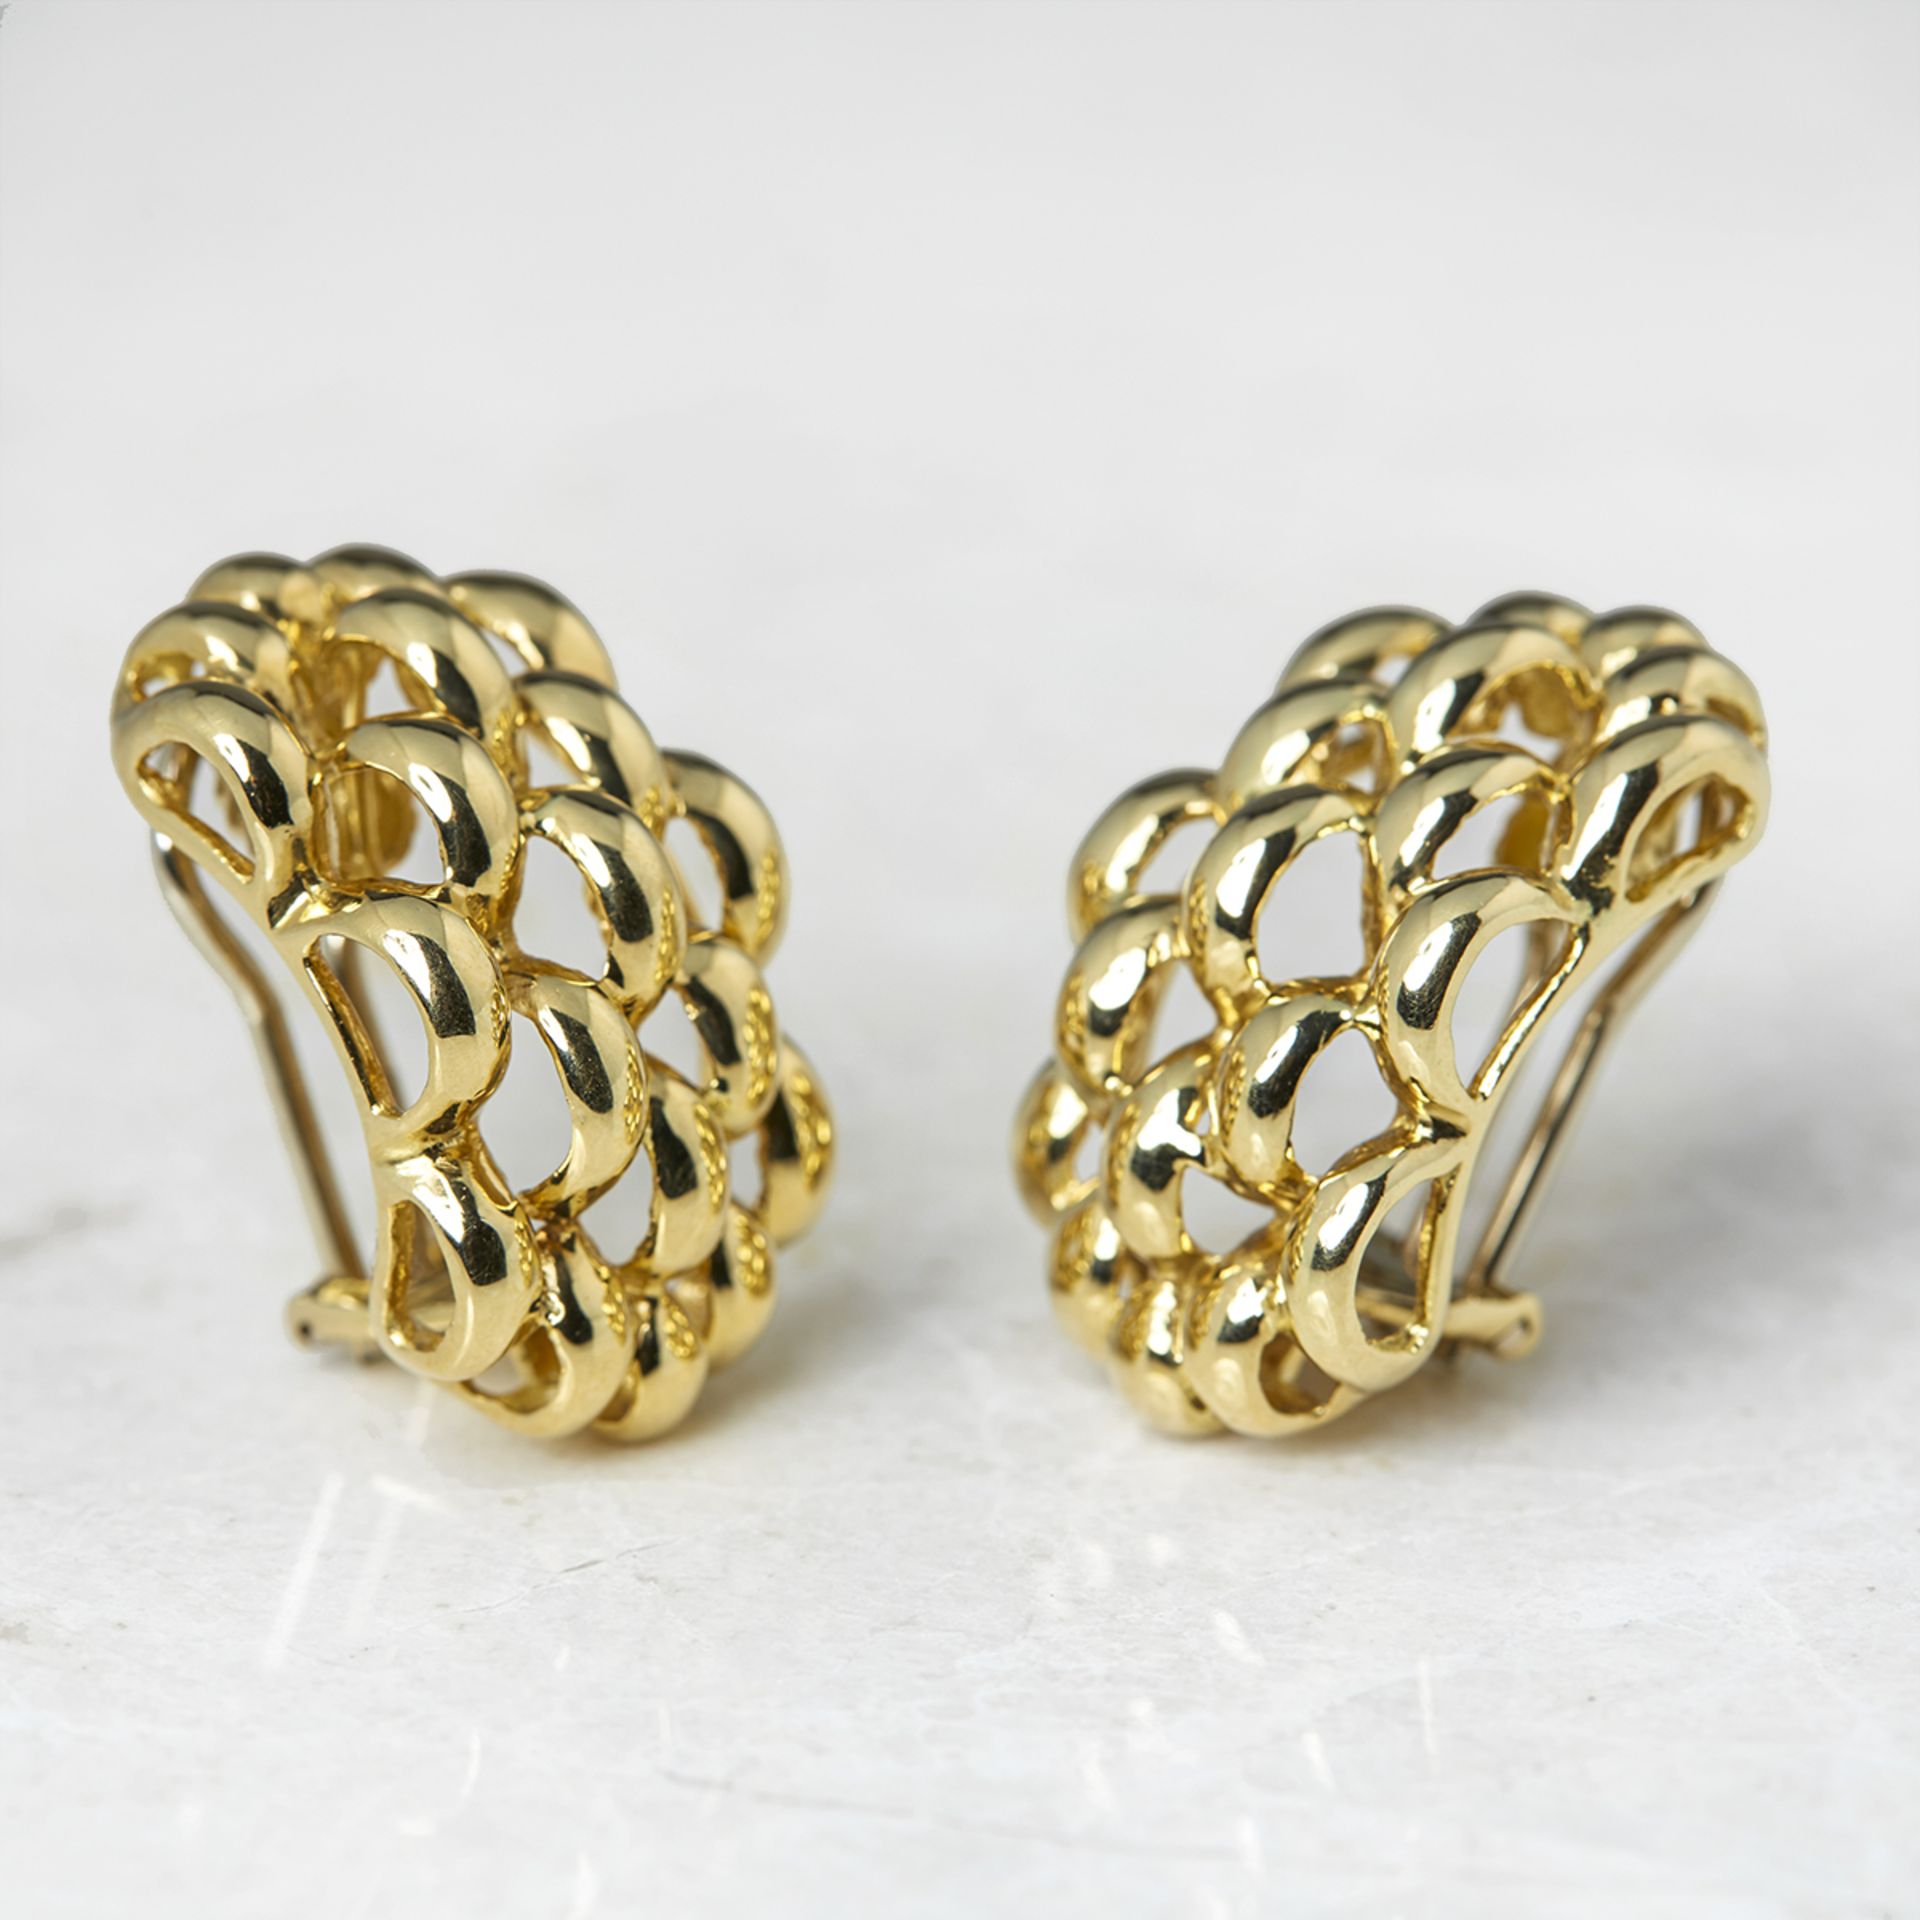 David Morris, 18k Yellow Gold Honeycomb Clip On Earrings - Image 2 of 6